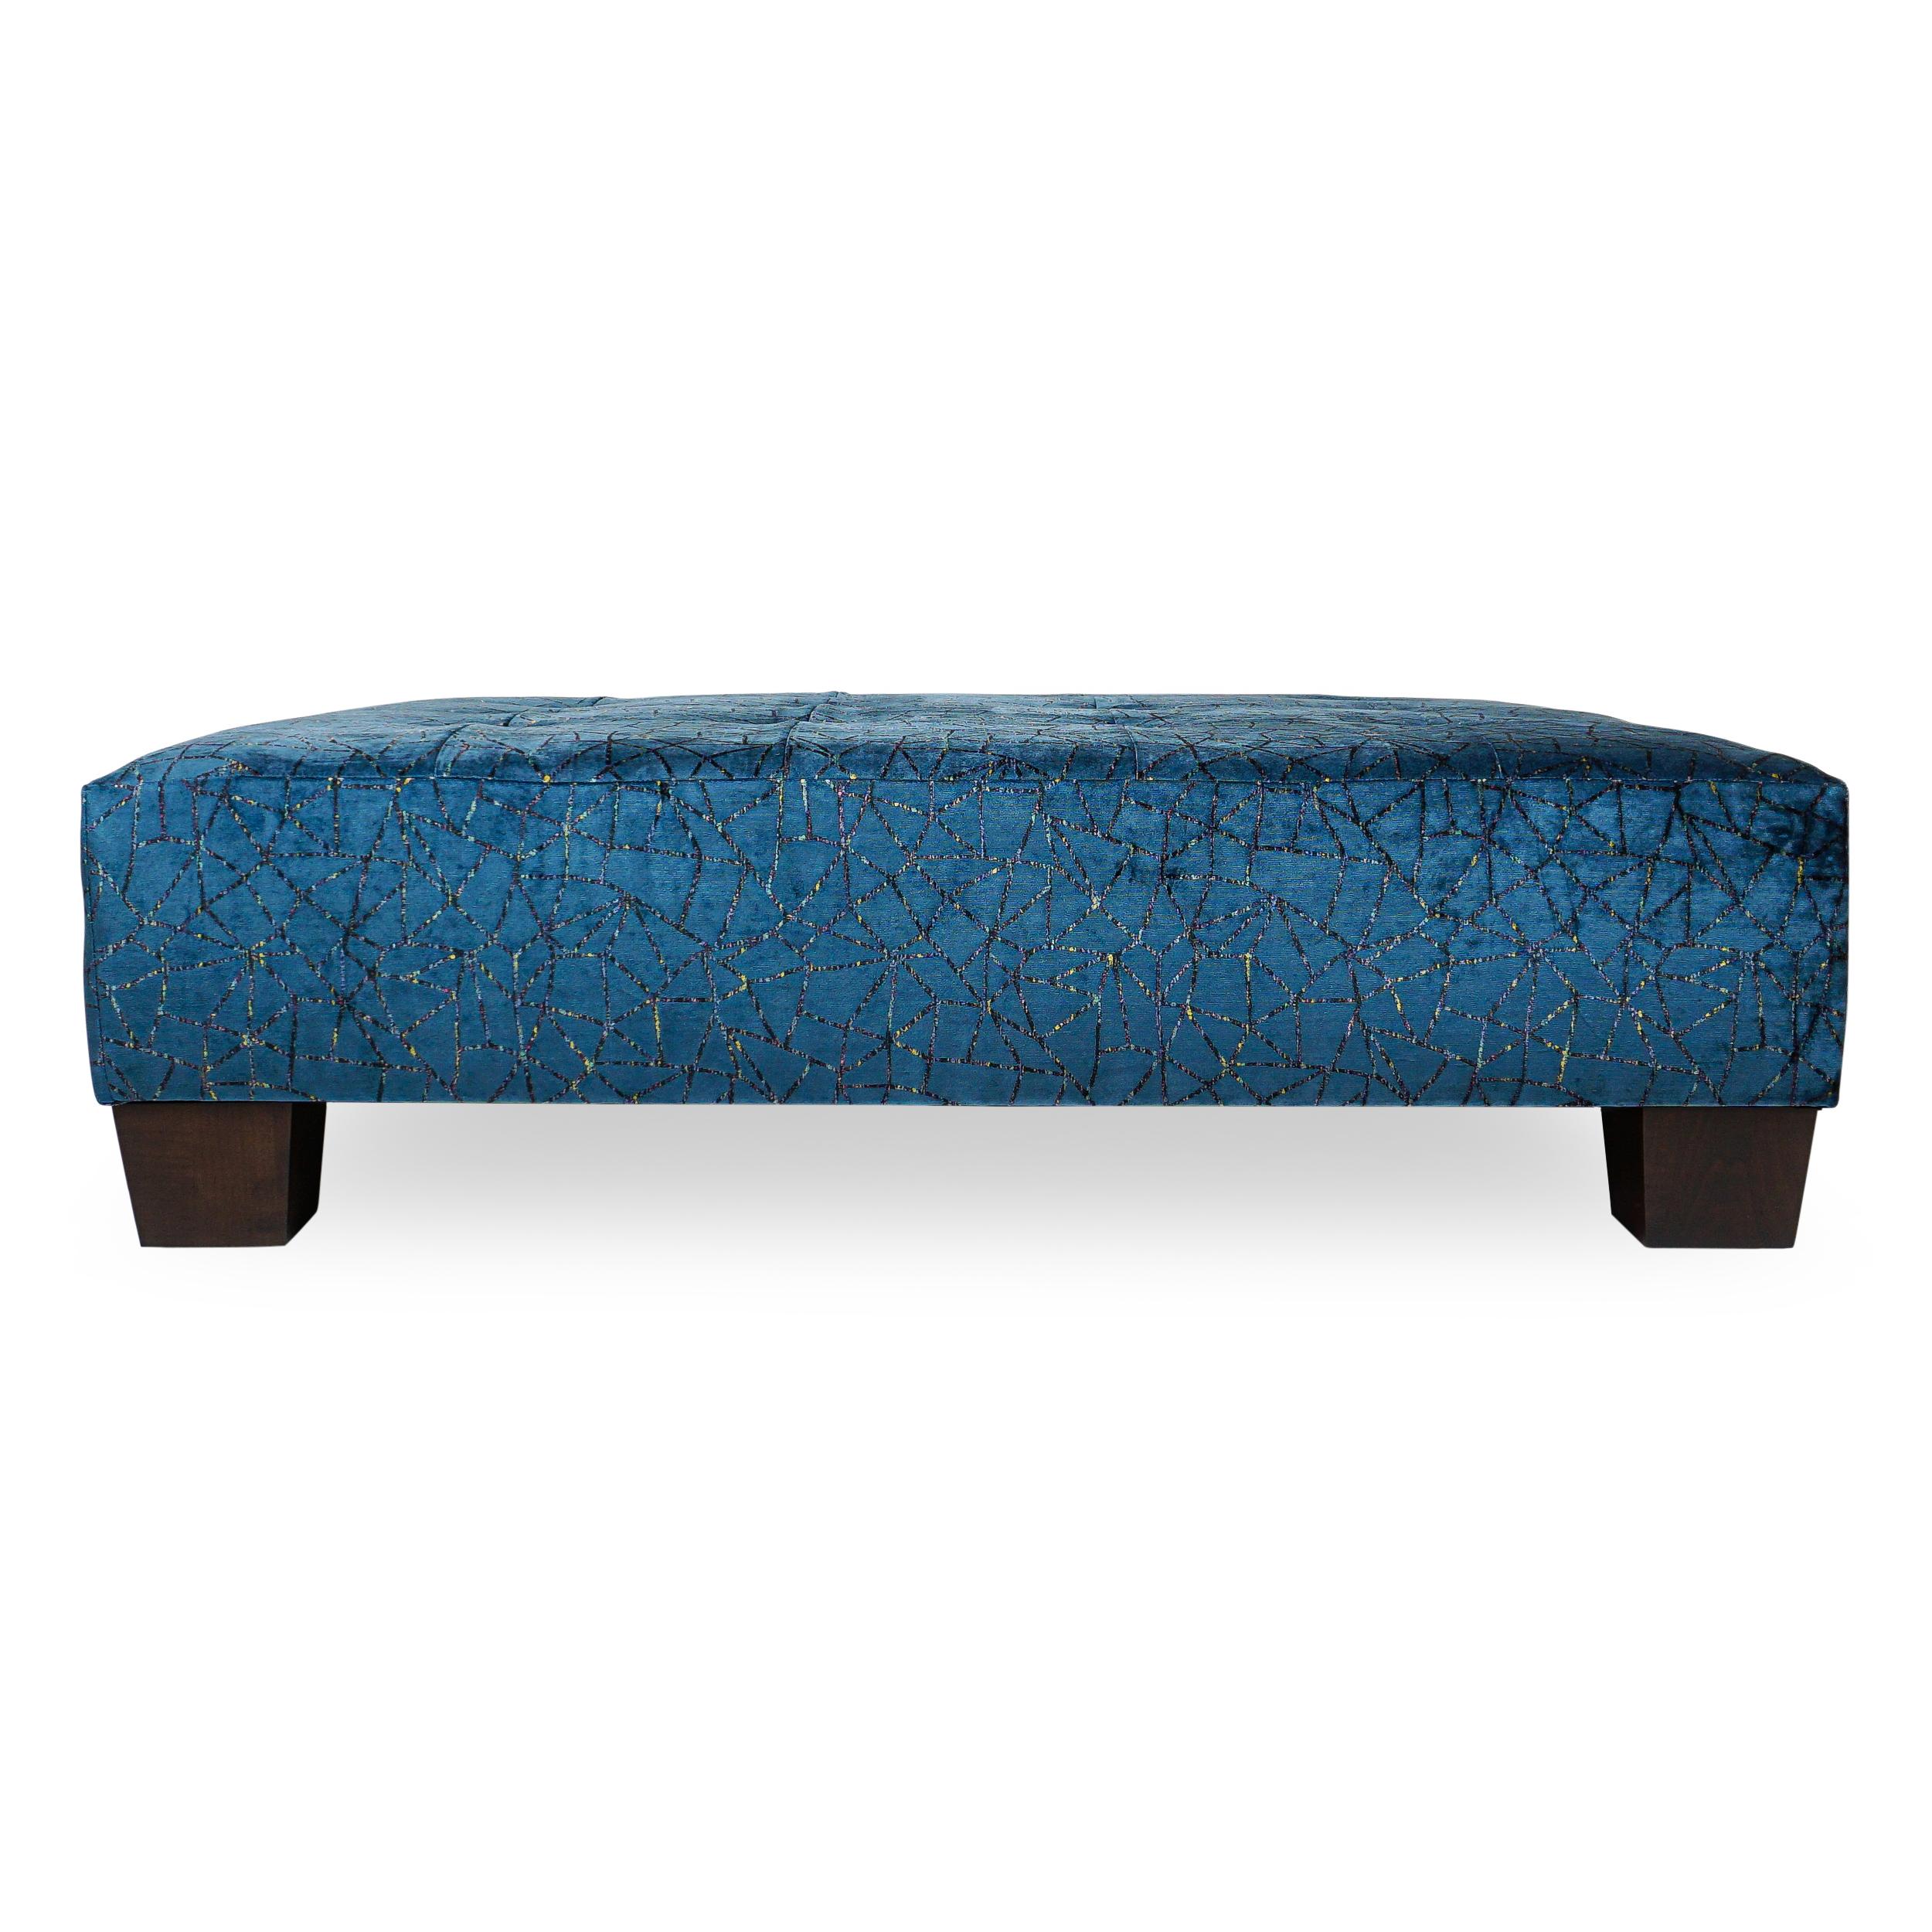 Transitional tufted ottoman in a modern shimmering blue cut velvet with metallic detail and thick stained maple feet. Frame made with solid hardwood and upholstered with eight-way hand-tied springs and high density foam. Firm enough to hold a tray